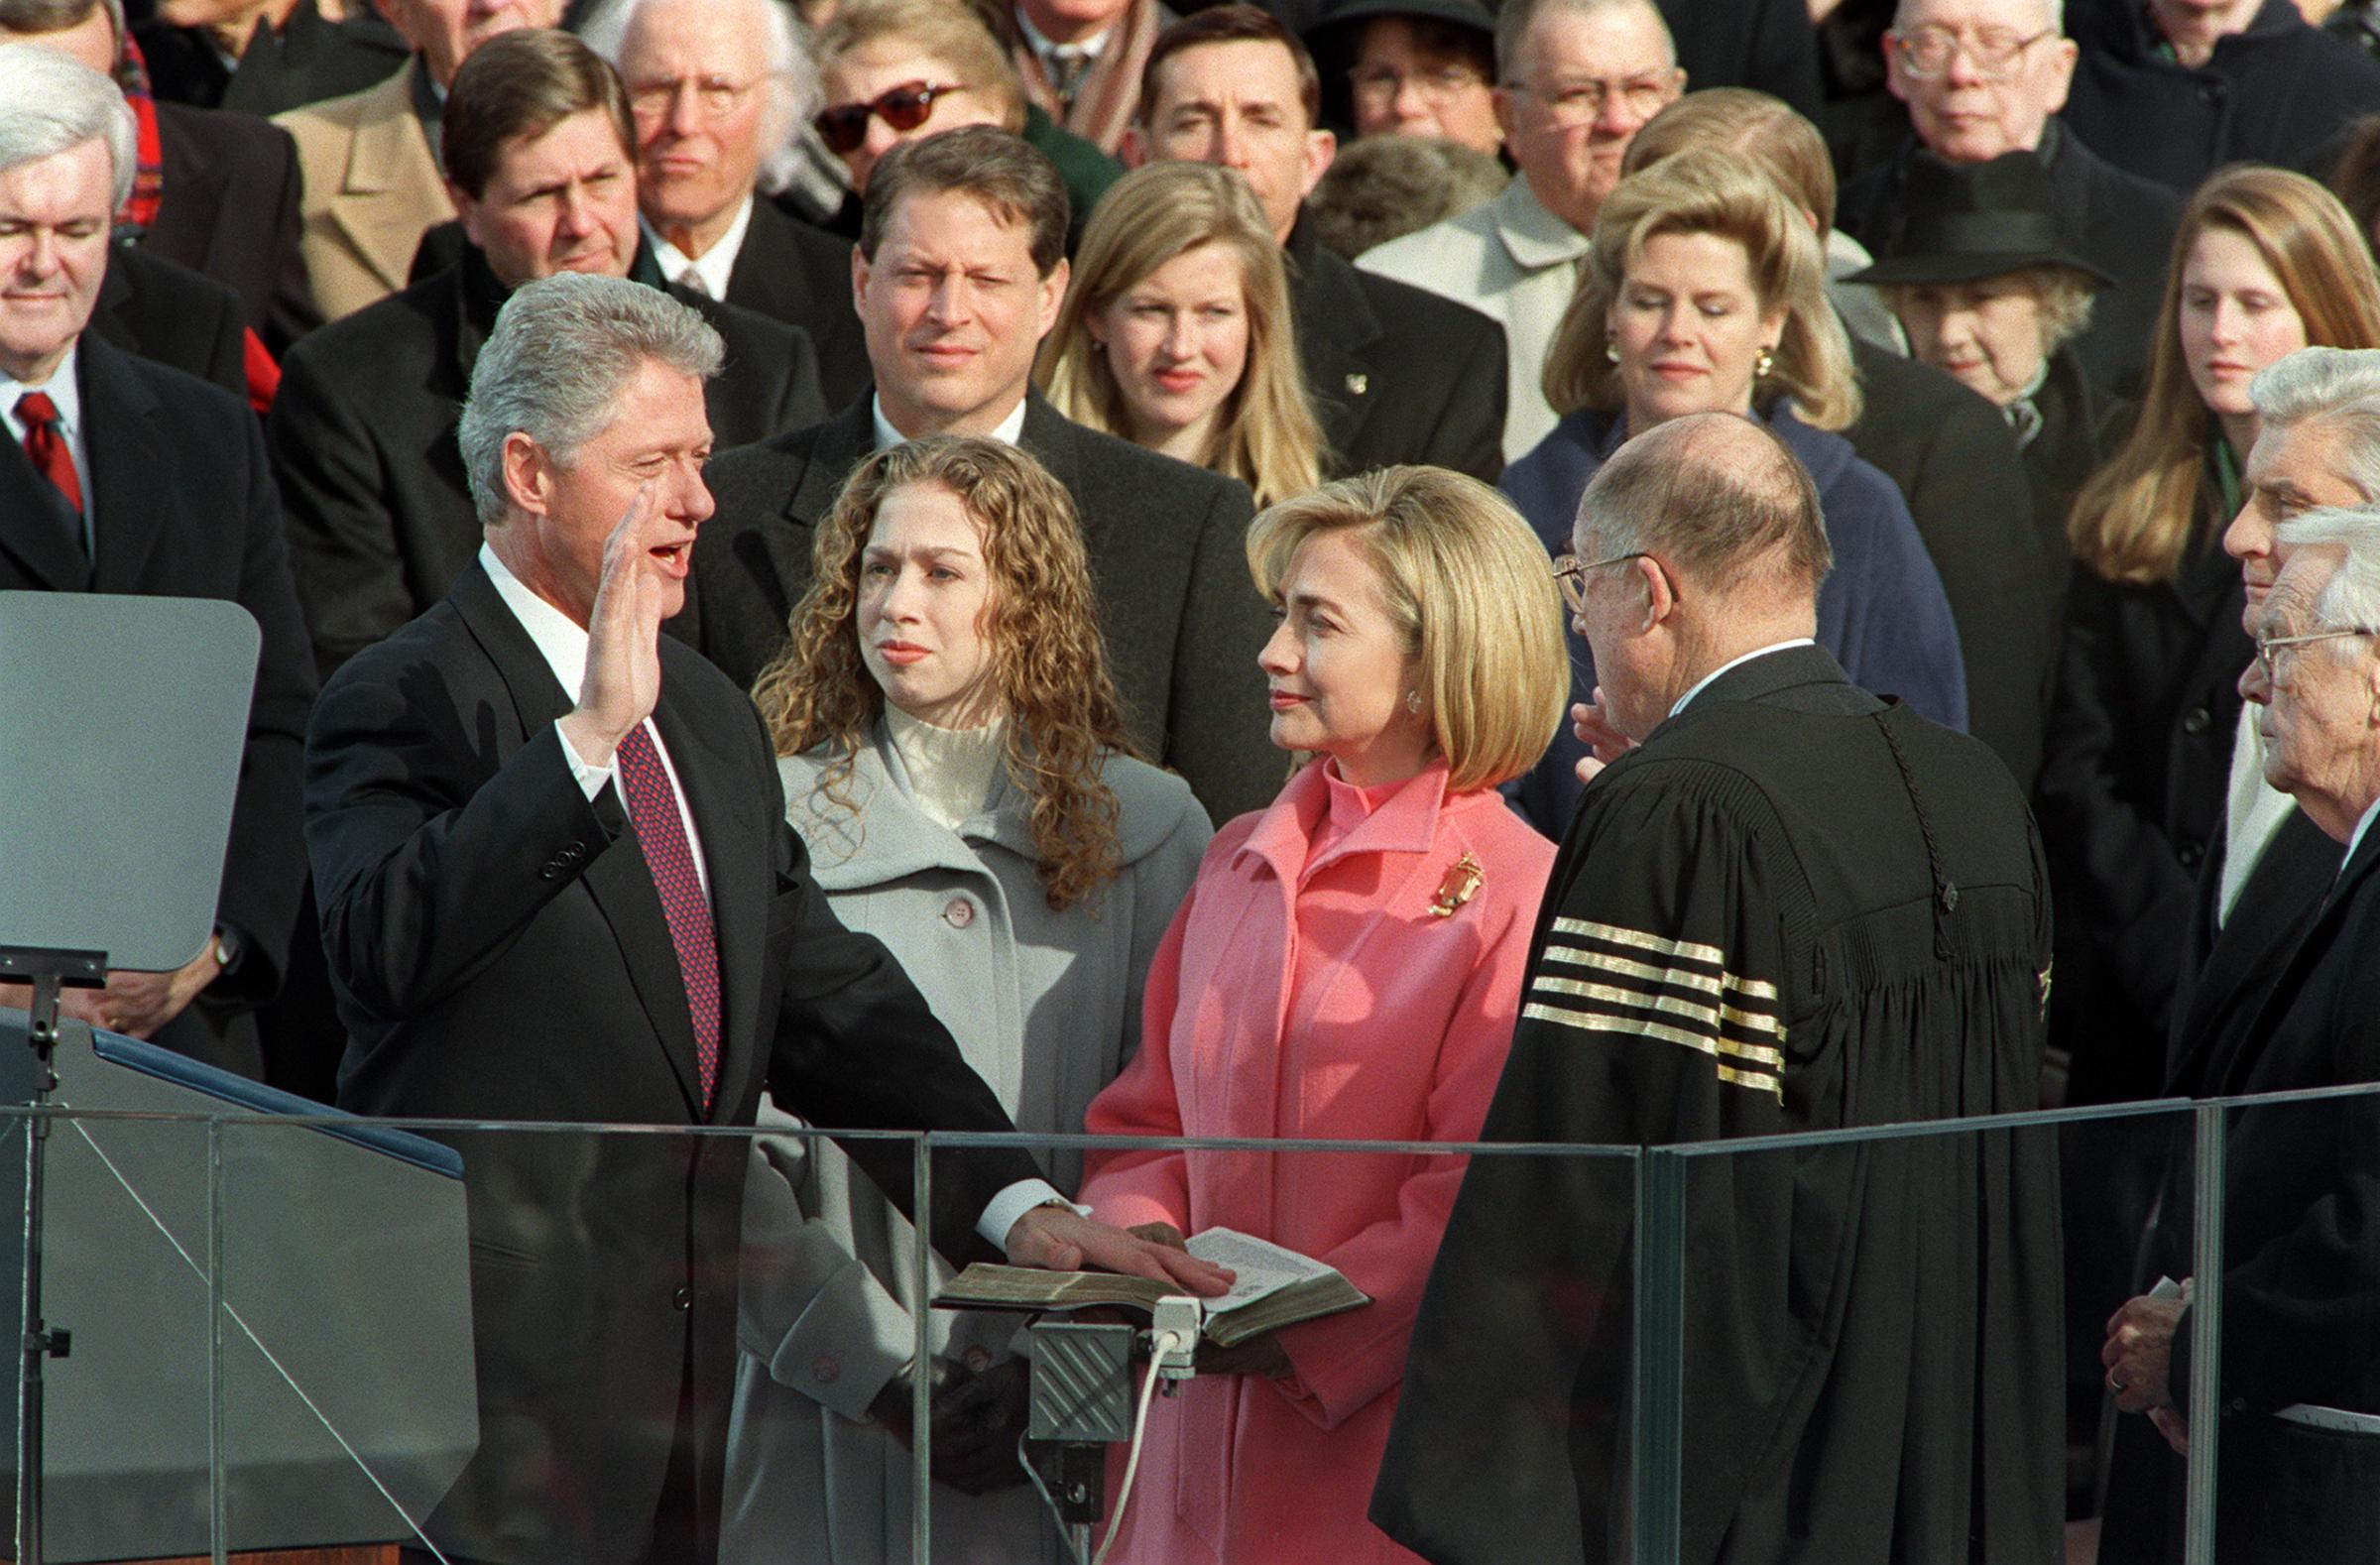 President Bill Clinton is sworn in Jan. 20, 1997 on Capitol Hill in Washington, D.C., for his second term as president of the United States by US Supreme Court Chief Justice William Rehnquist as First Lady Hillary Rodham Clinton and daughter Chelsea look on.